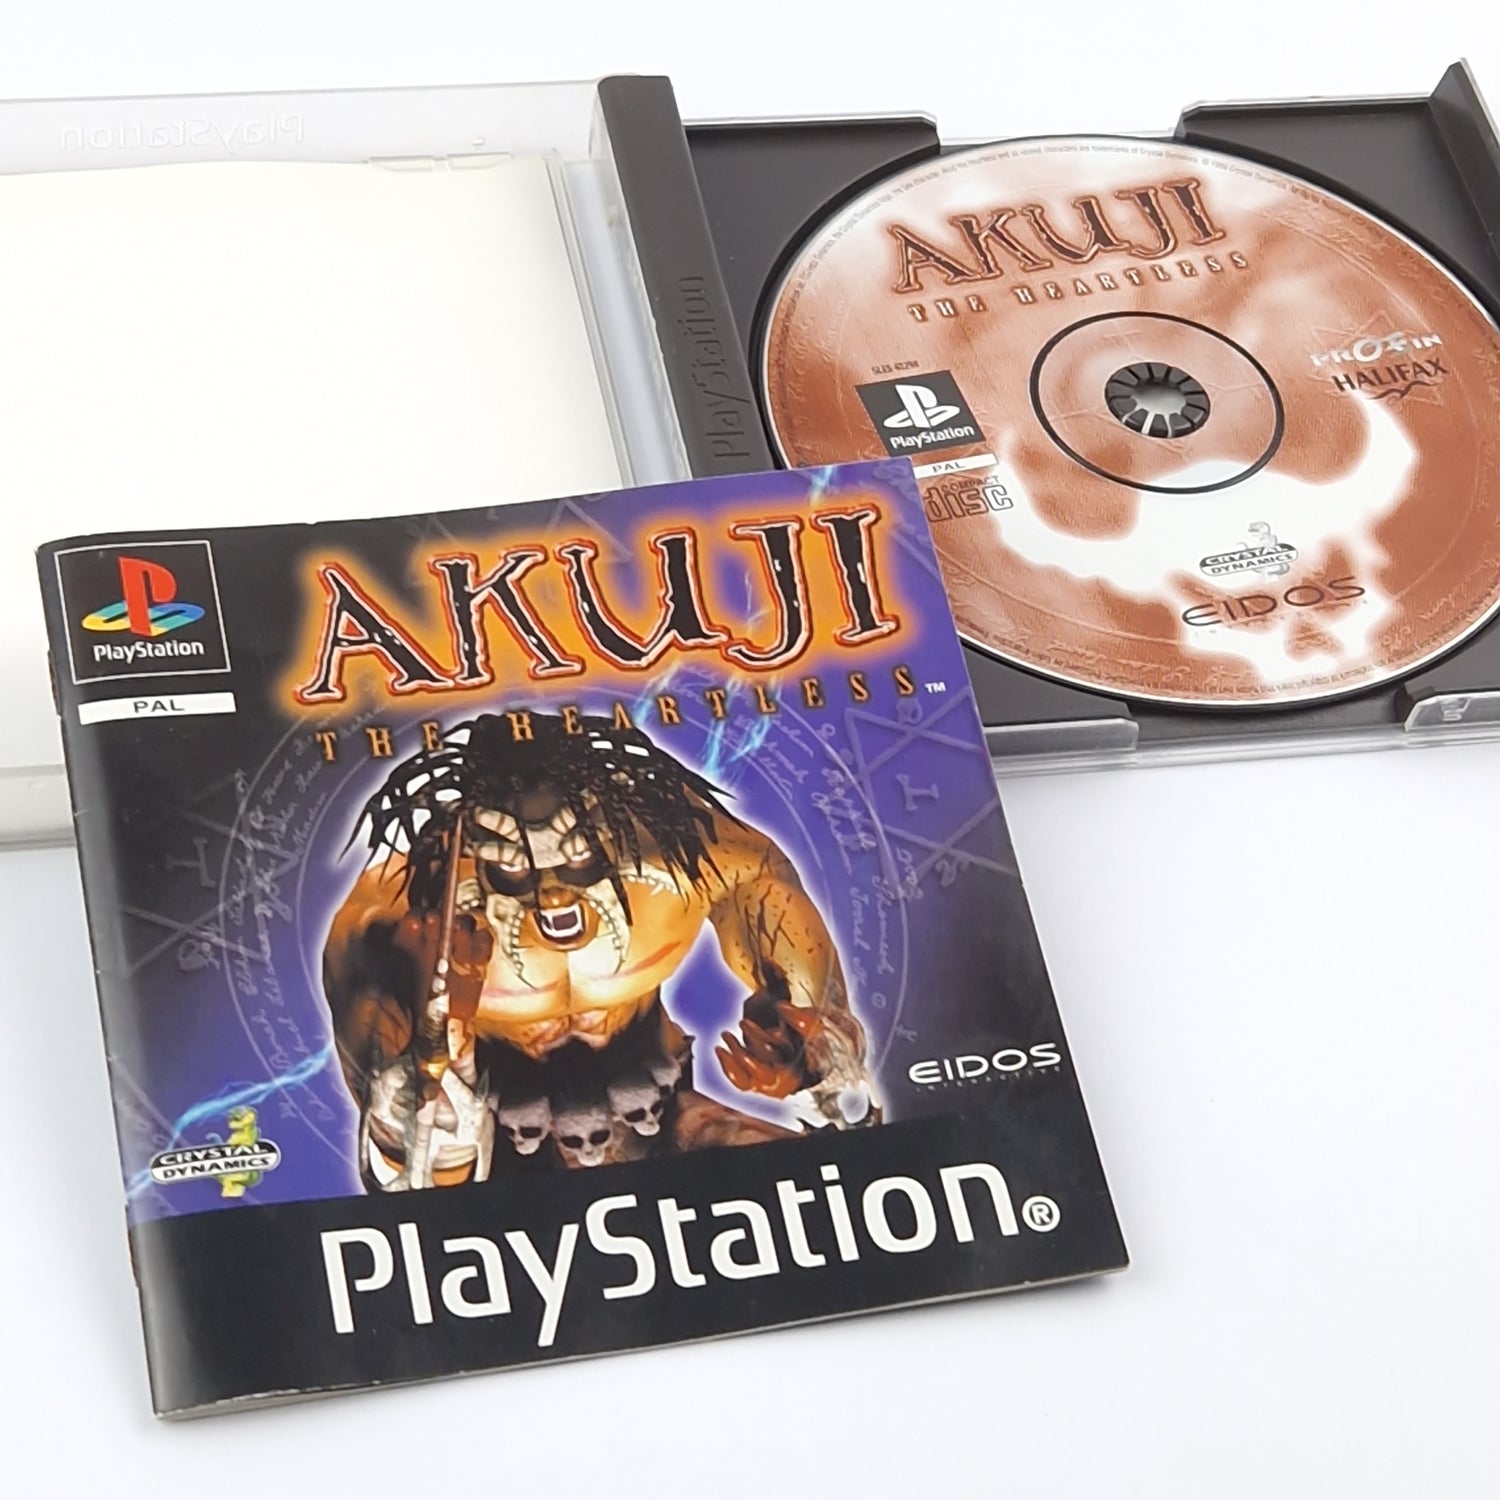 Sony Playstation 1 Game: Akuji The Heartless - OVP Instructions - PS1 PSX PAL